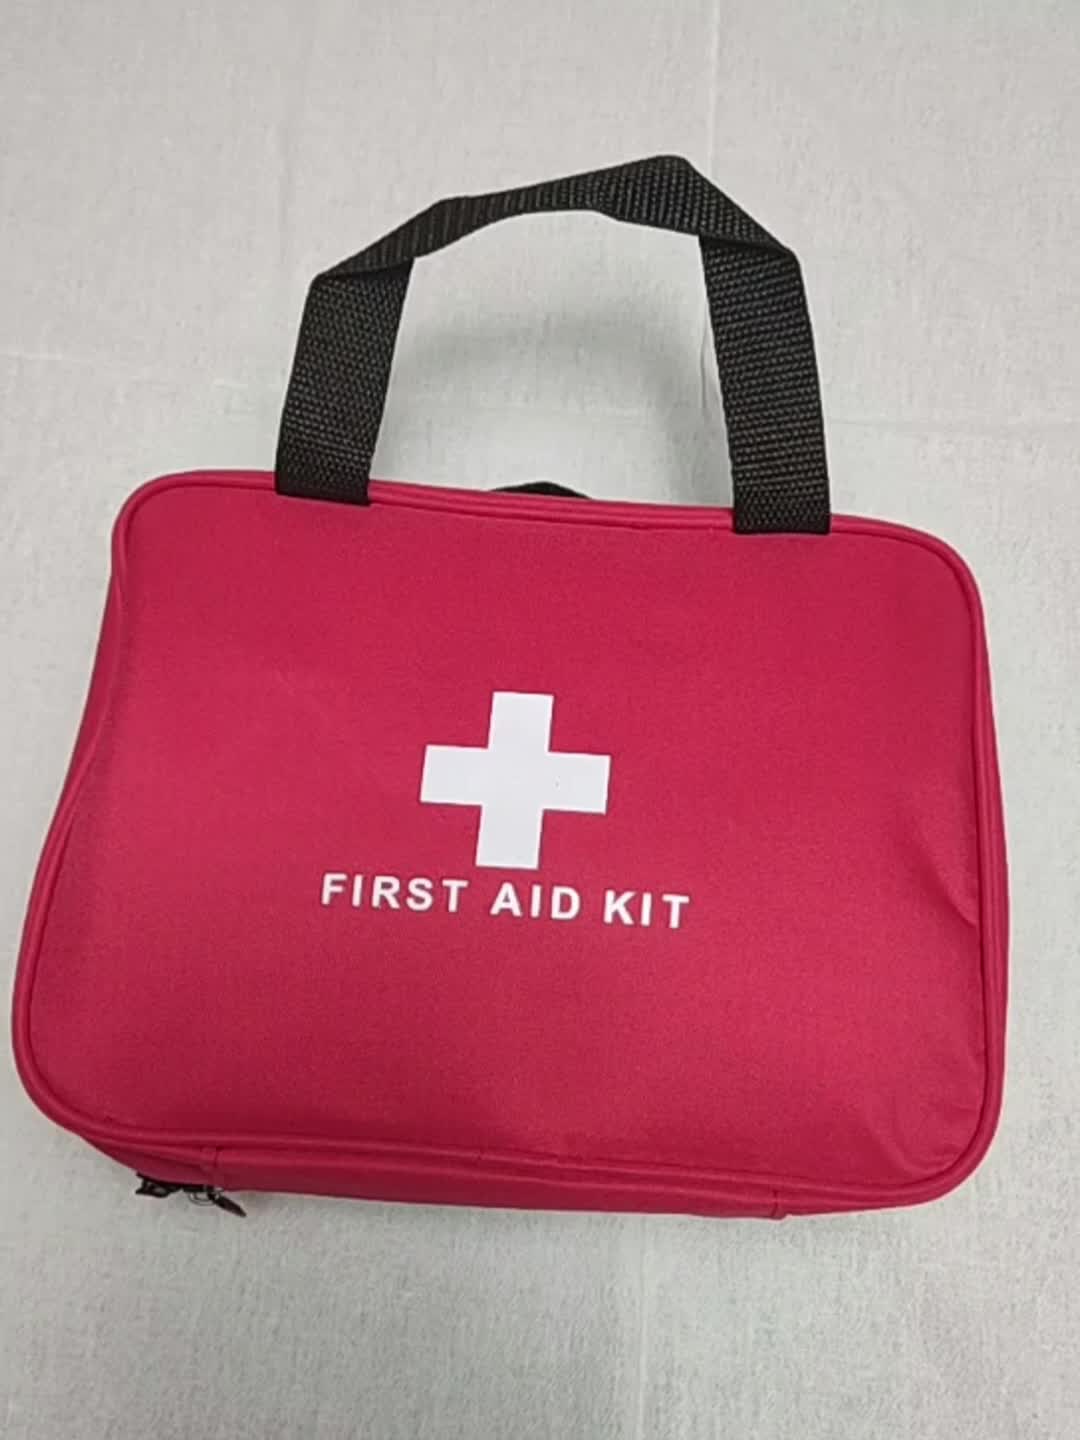 Emergency Survival Kit and First Aid Kit, 142Pcs Professional